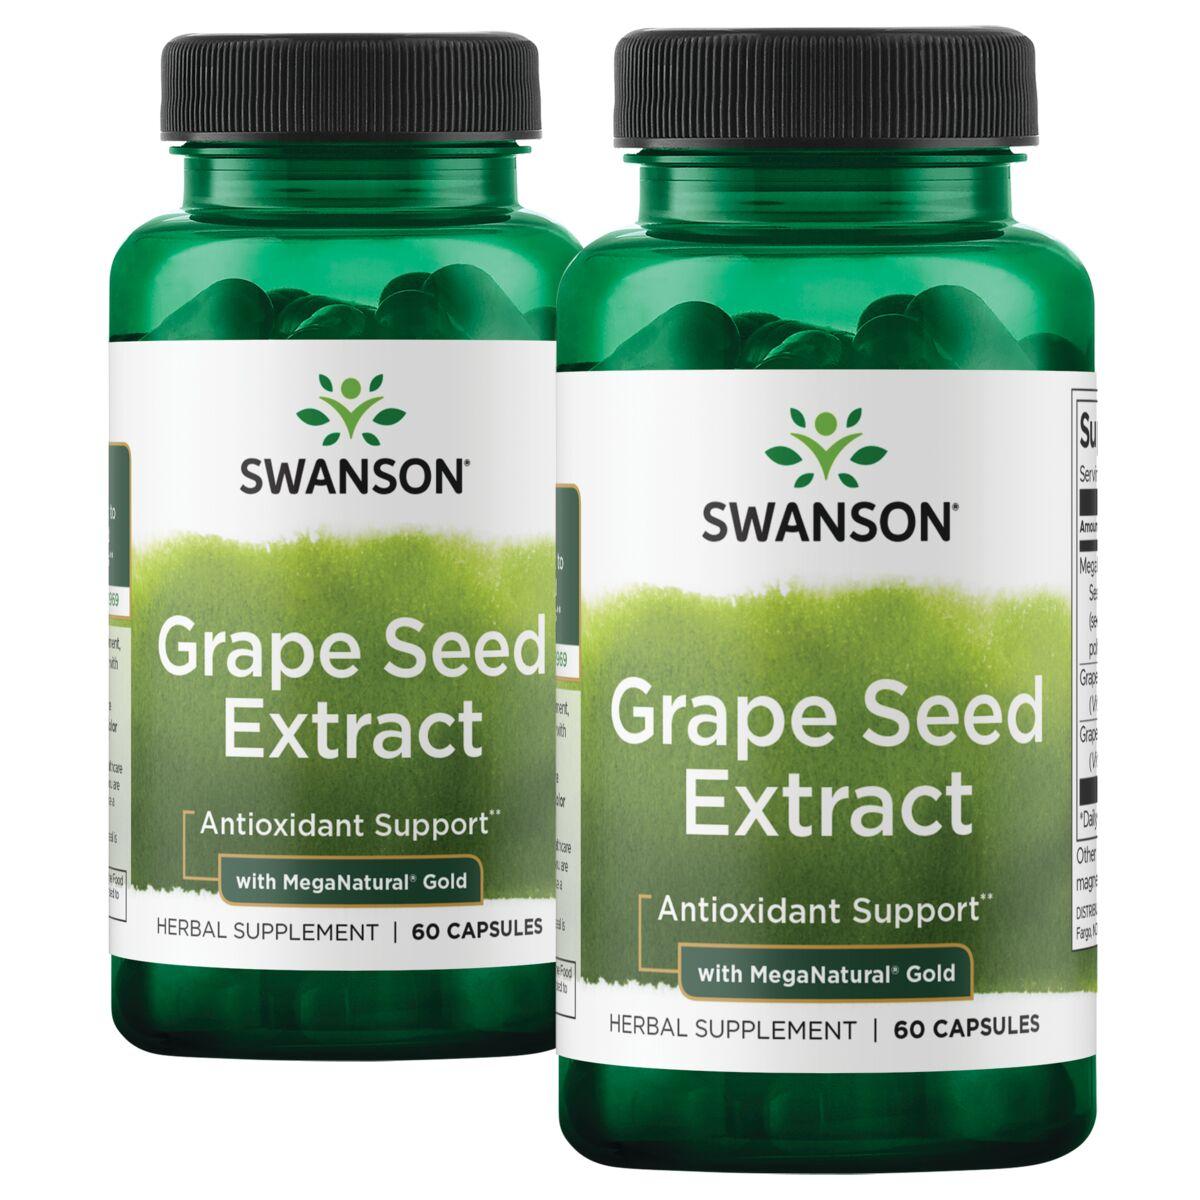 Swanson Superior Herbs Grape Seed Extract with Meganatural Gold - 2 Pack Vitamin | 2 Pack